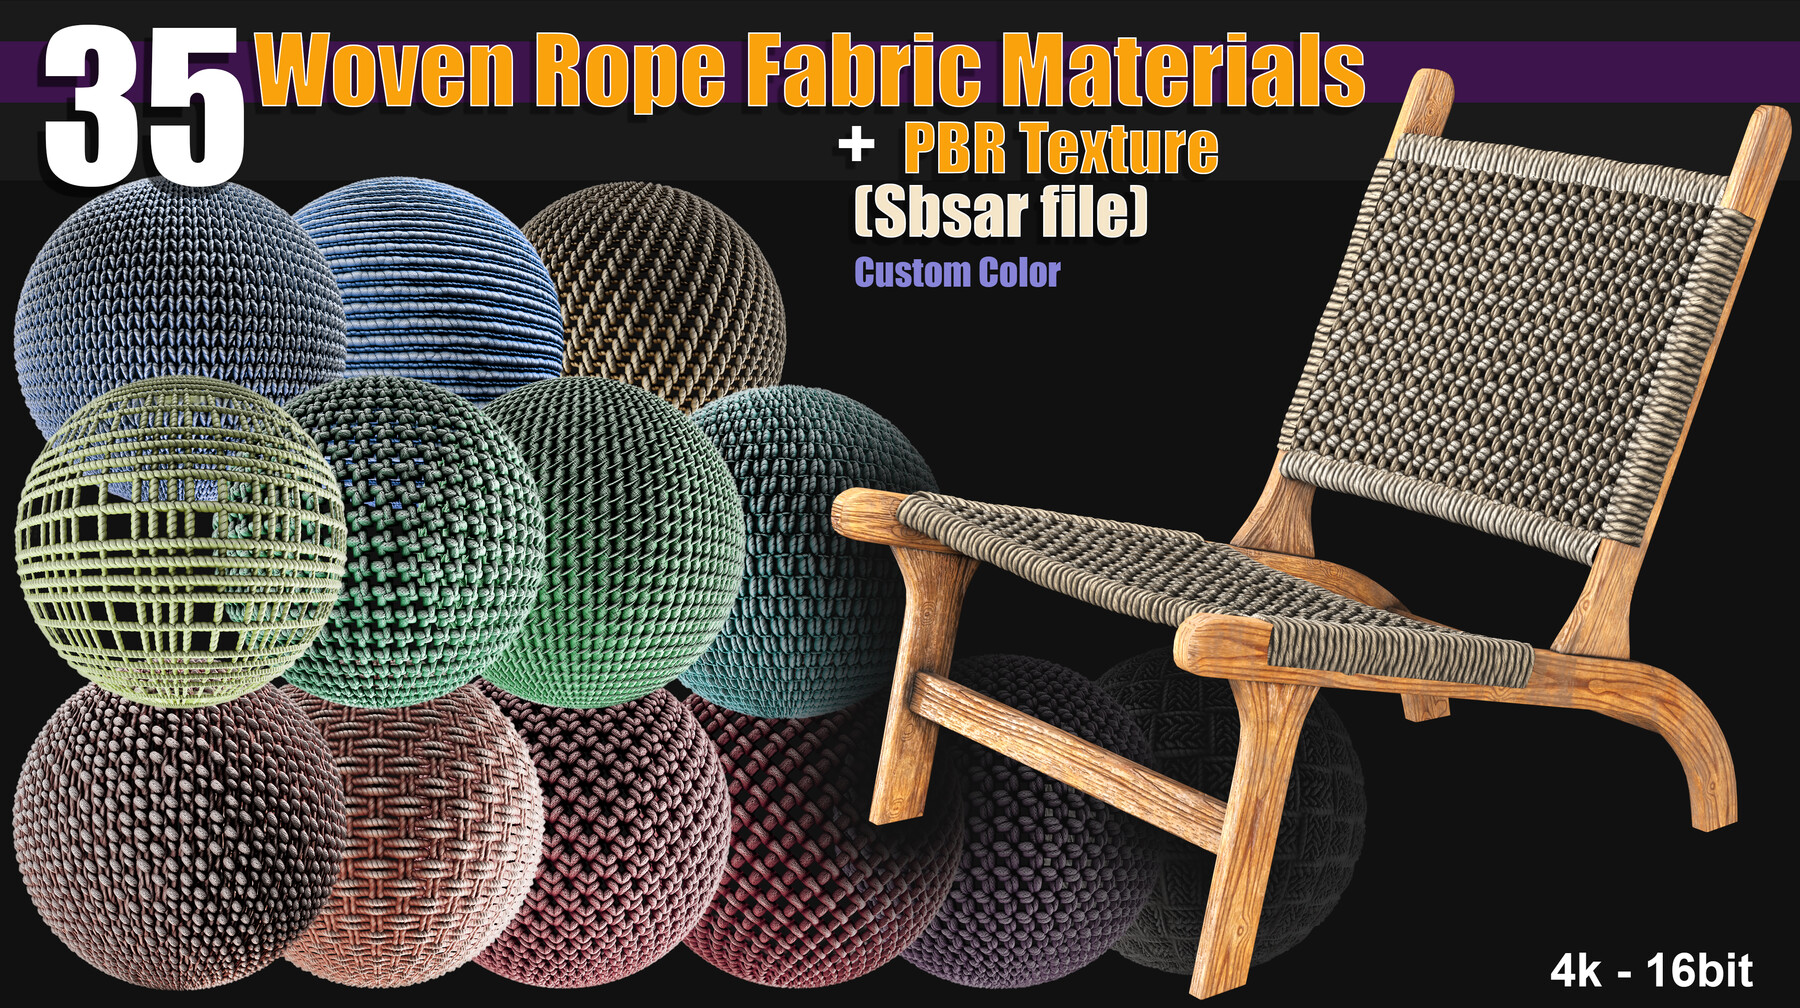 ArtStation Woven Rope Fabric Materials | Resources